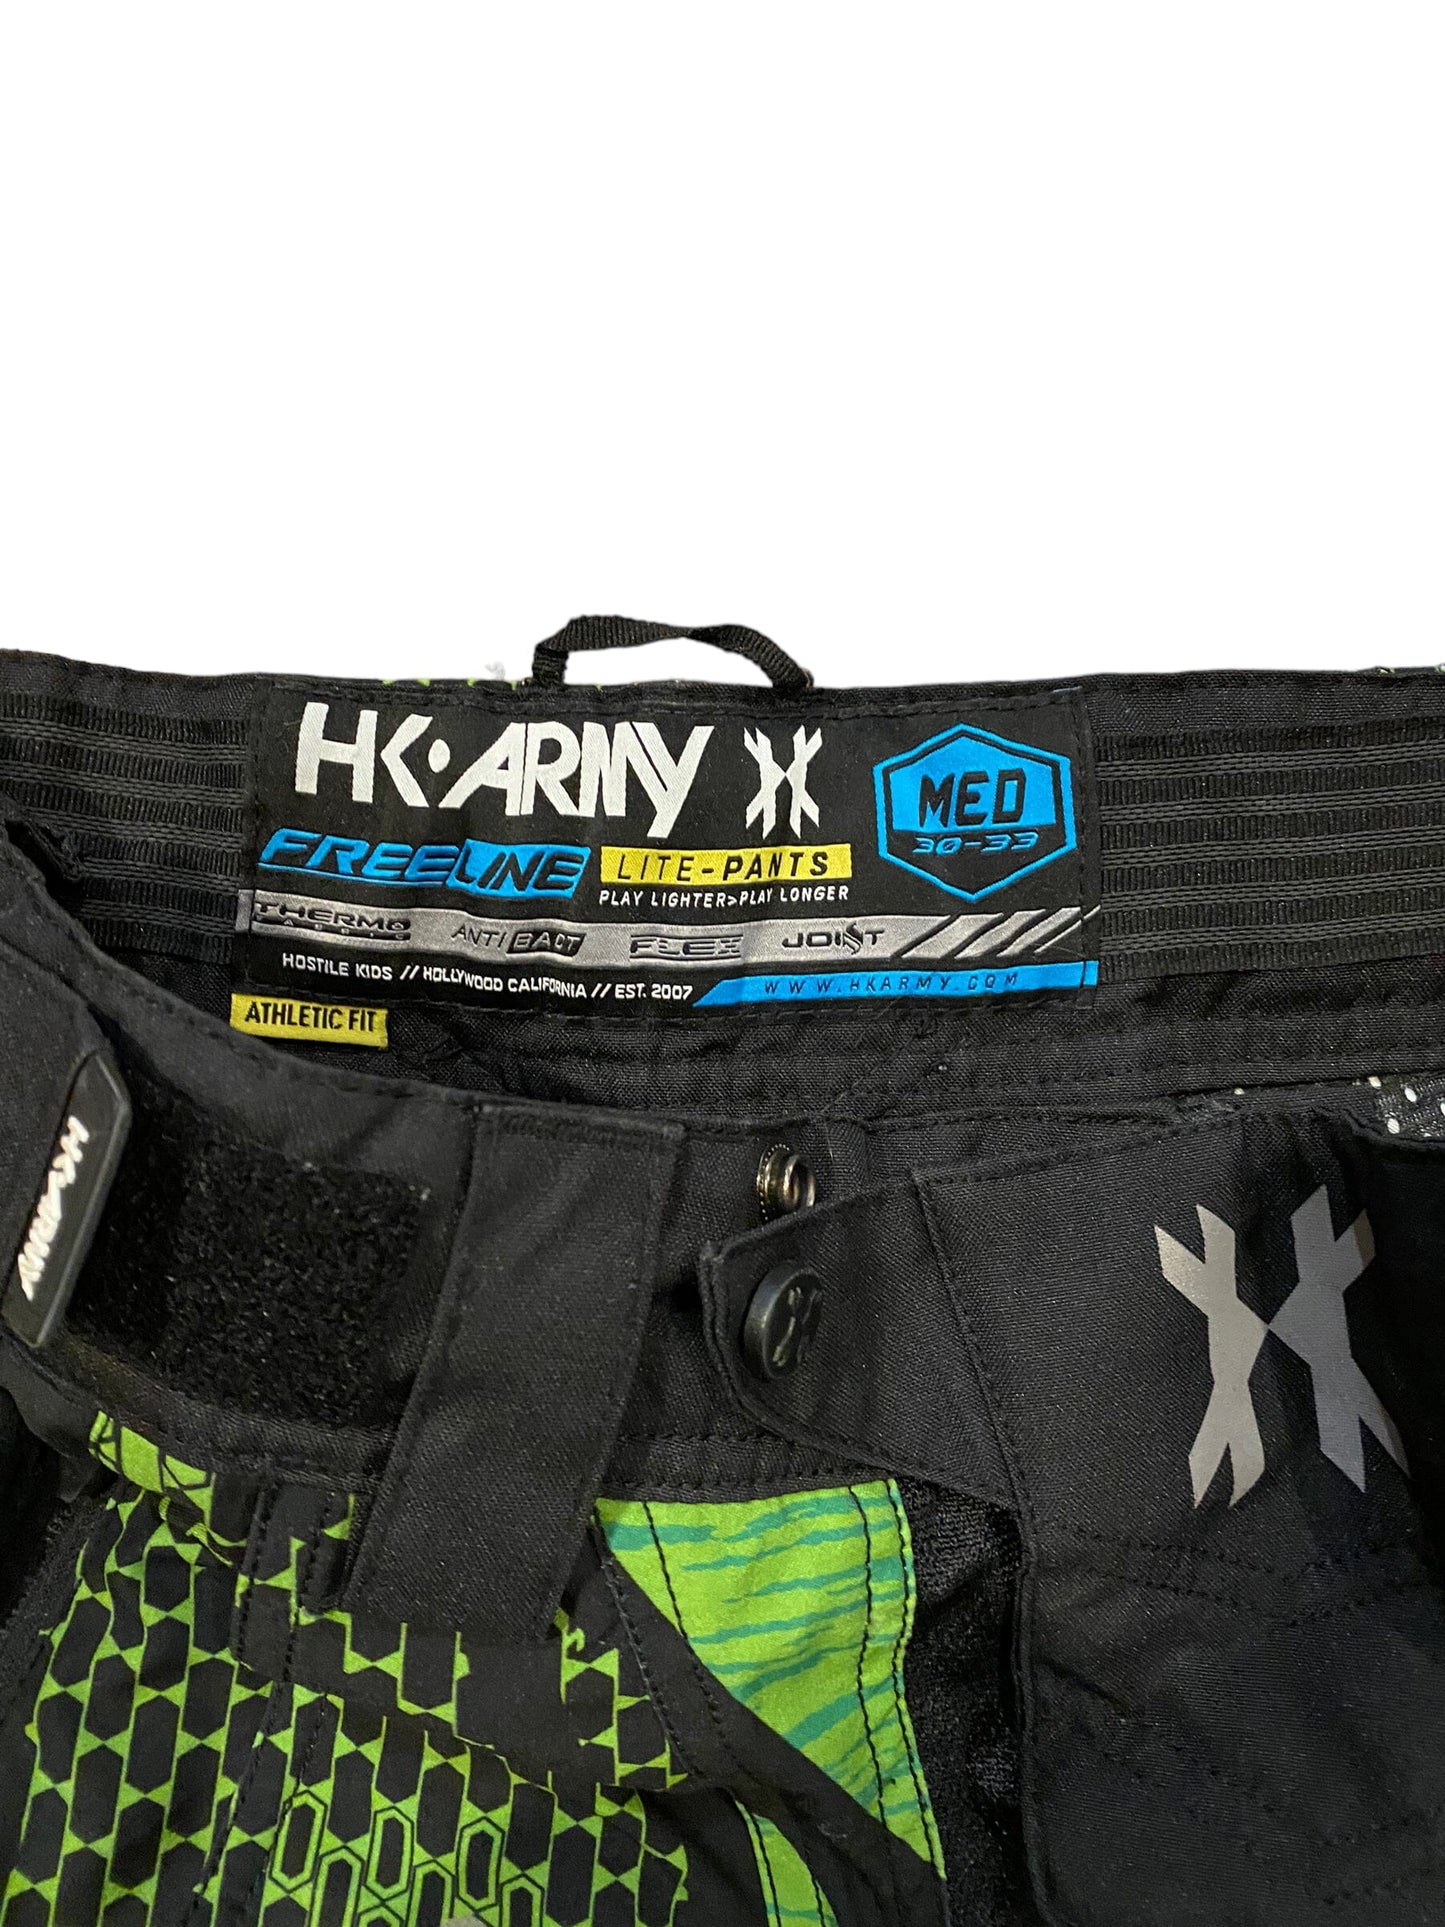 Used Hk Army Freeline Lite Pants size Medium Paintball Gun from CPXBrosPaintball Buy/Sell/Trade Paintball Markers, Paintball Hoppers, Paintball Masks, and Hormesis Headbands